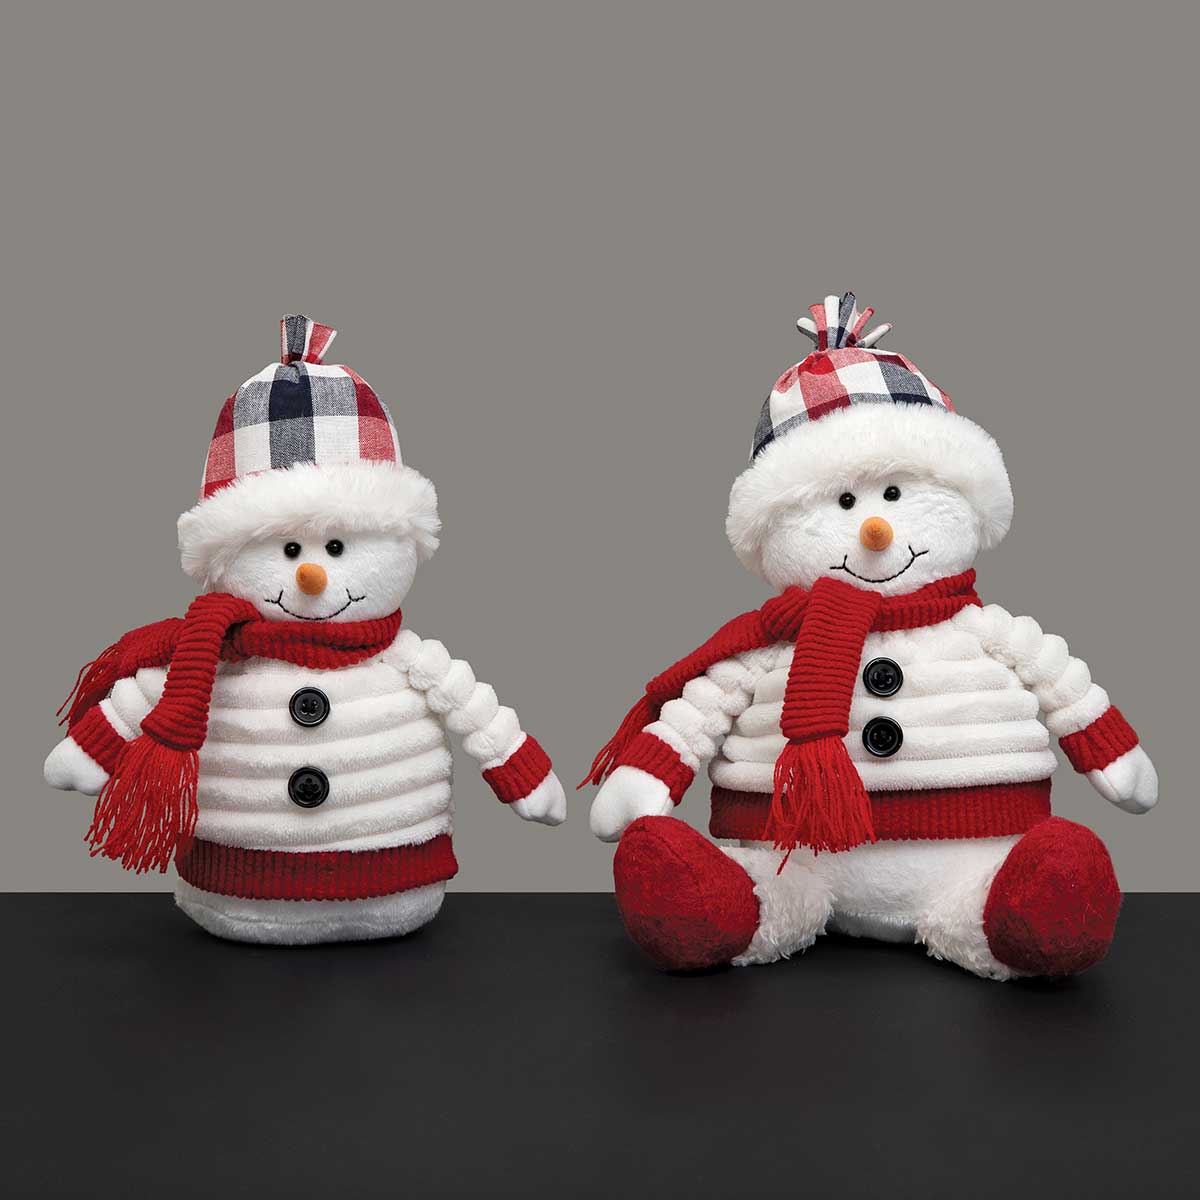 SNOWMAN WITH JACKET AND FEET 6IN X 10IN WHITE/RED